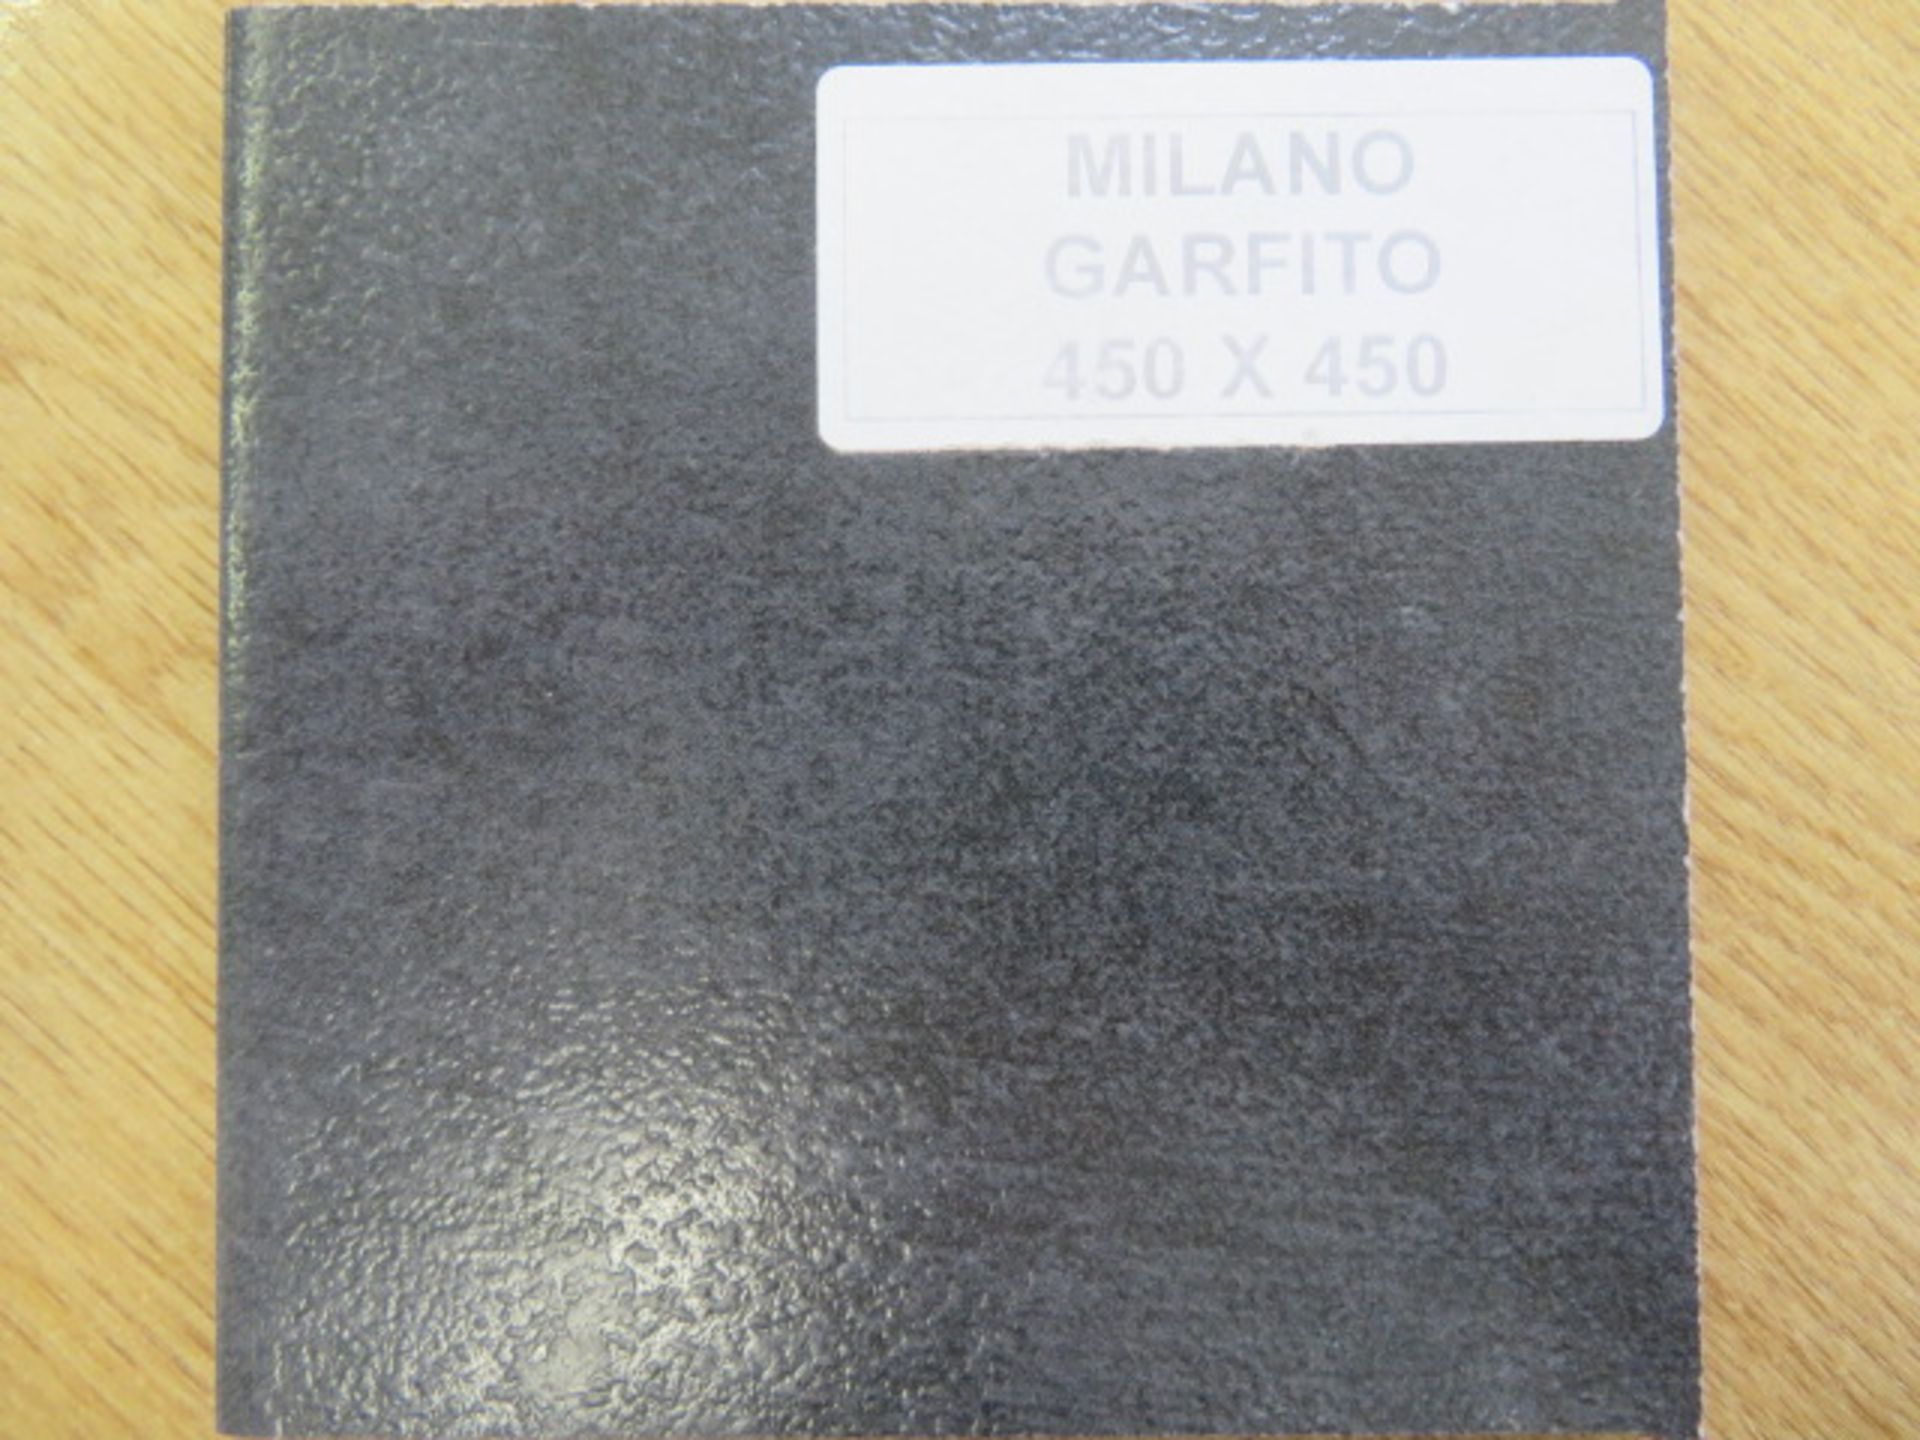 NEW 8 Square Meters of Milano Garfito Wall and Floor Tiles. 450x450mm per tile, 10mm Thick. G... - Image 2 of 3